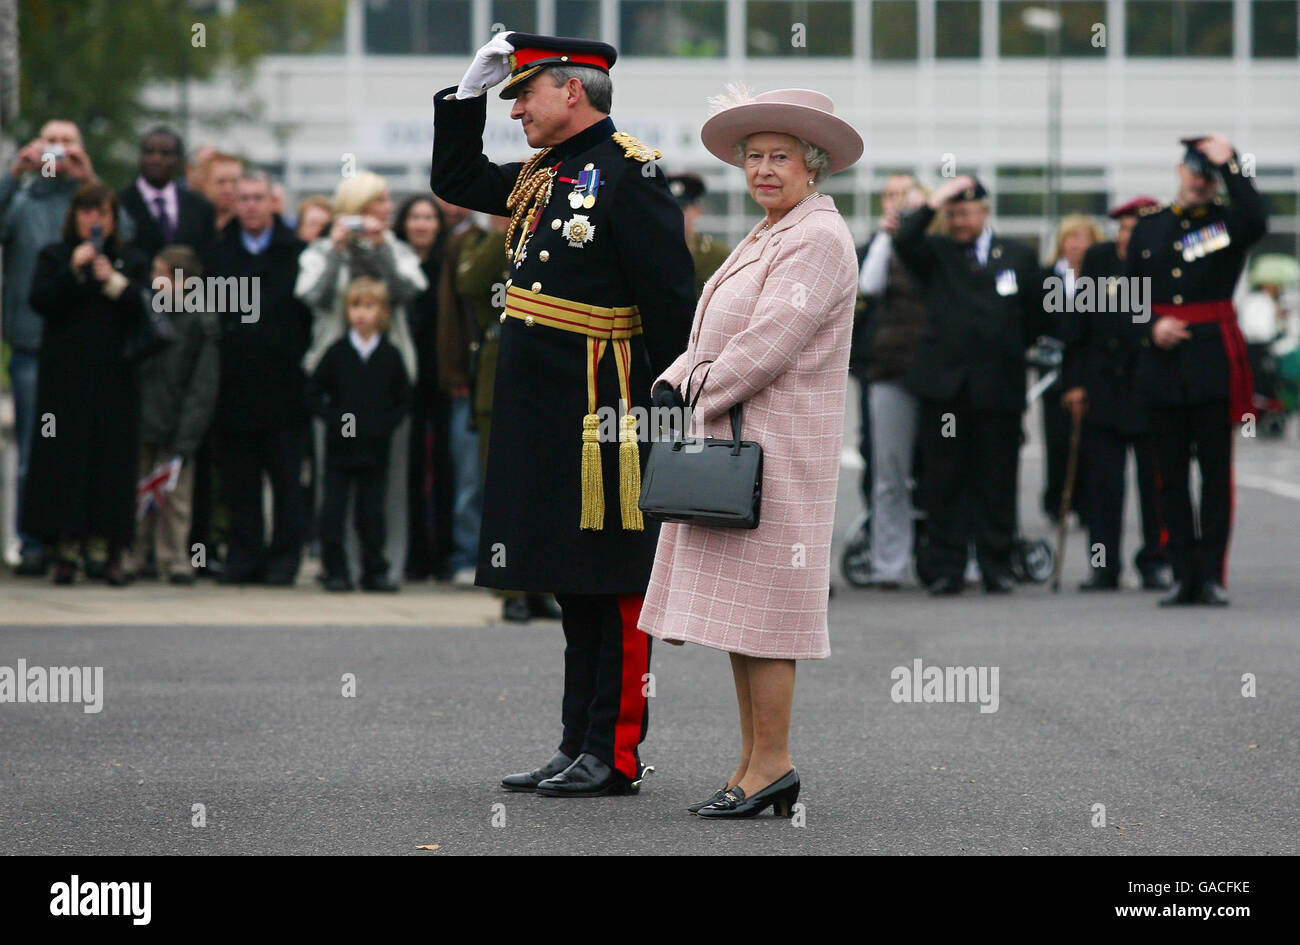 Britain's Queen Elizabeth II accompanied by Chief Royal Engineer Sir Kevin O'Donoghue at the end of a visit to the Corps of Royal Engineers at Brompton Barracks, Chatham, Kent. Stock Photo